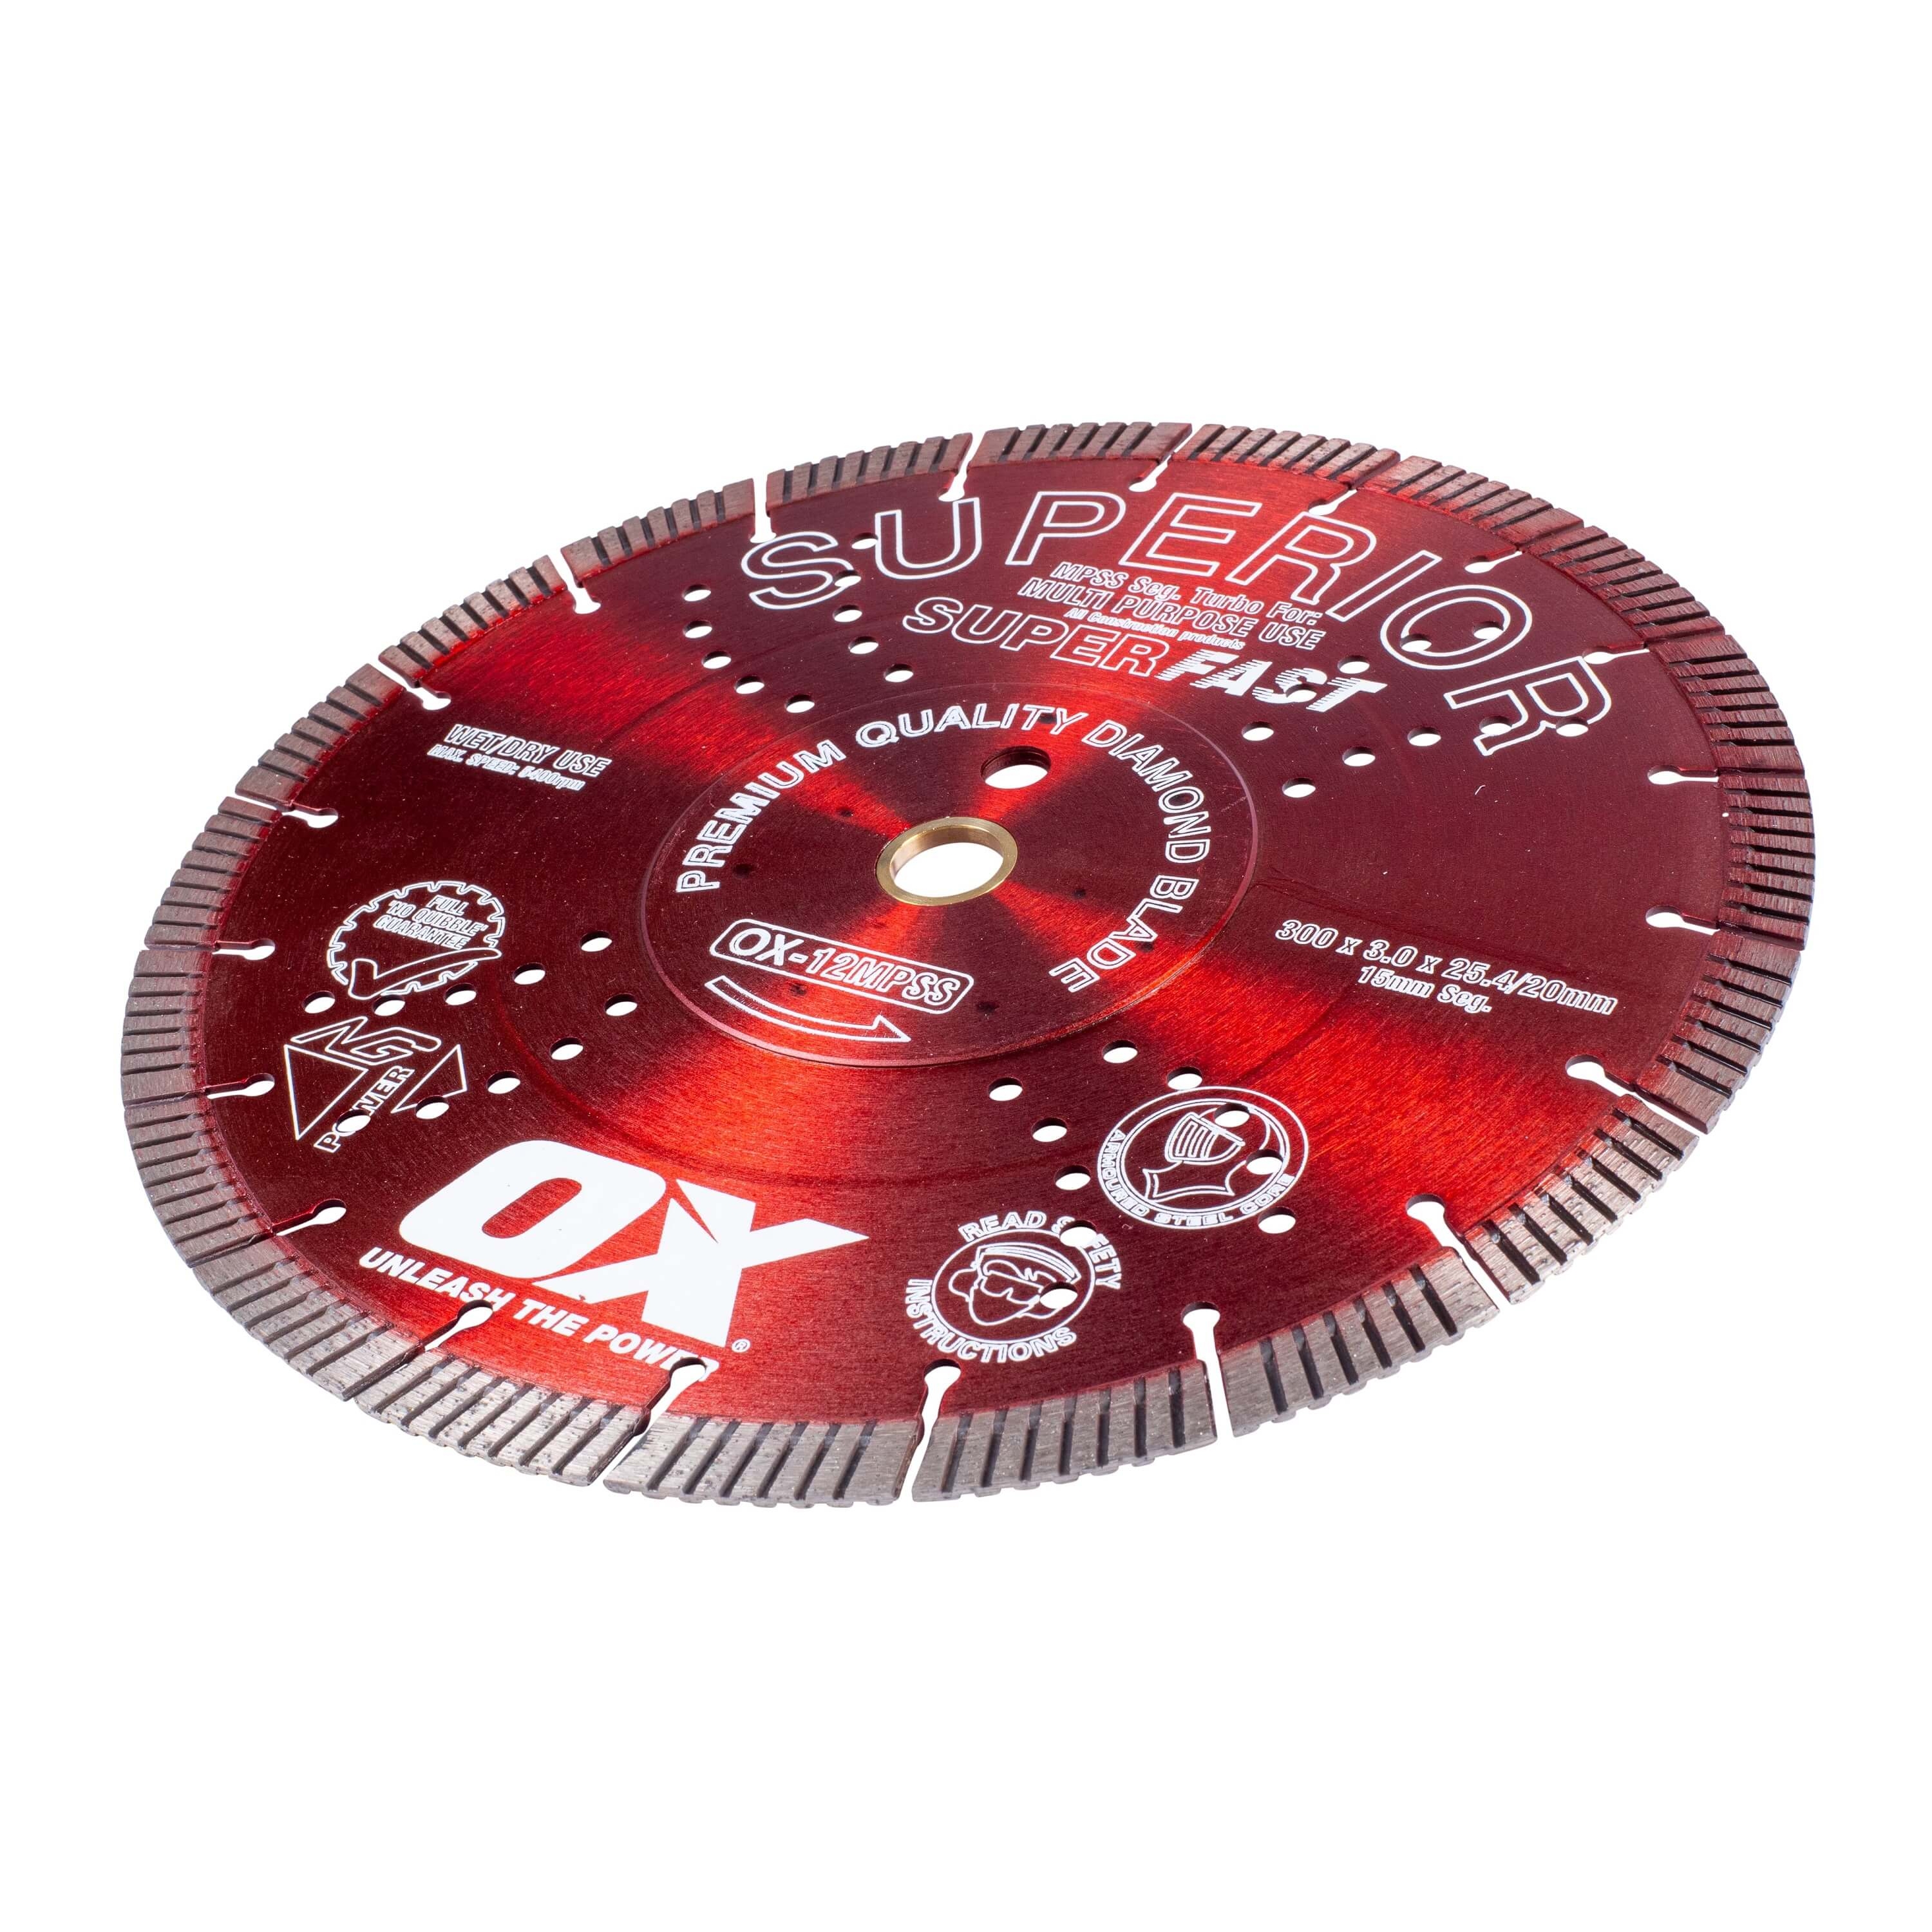 OX Diamond Blade Guaranteed to cut all Construction Products and Fast  Cutting 12 inch Beton Tools